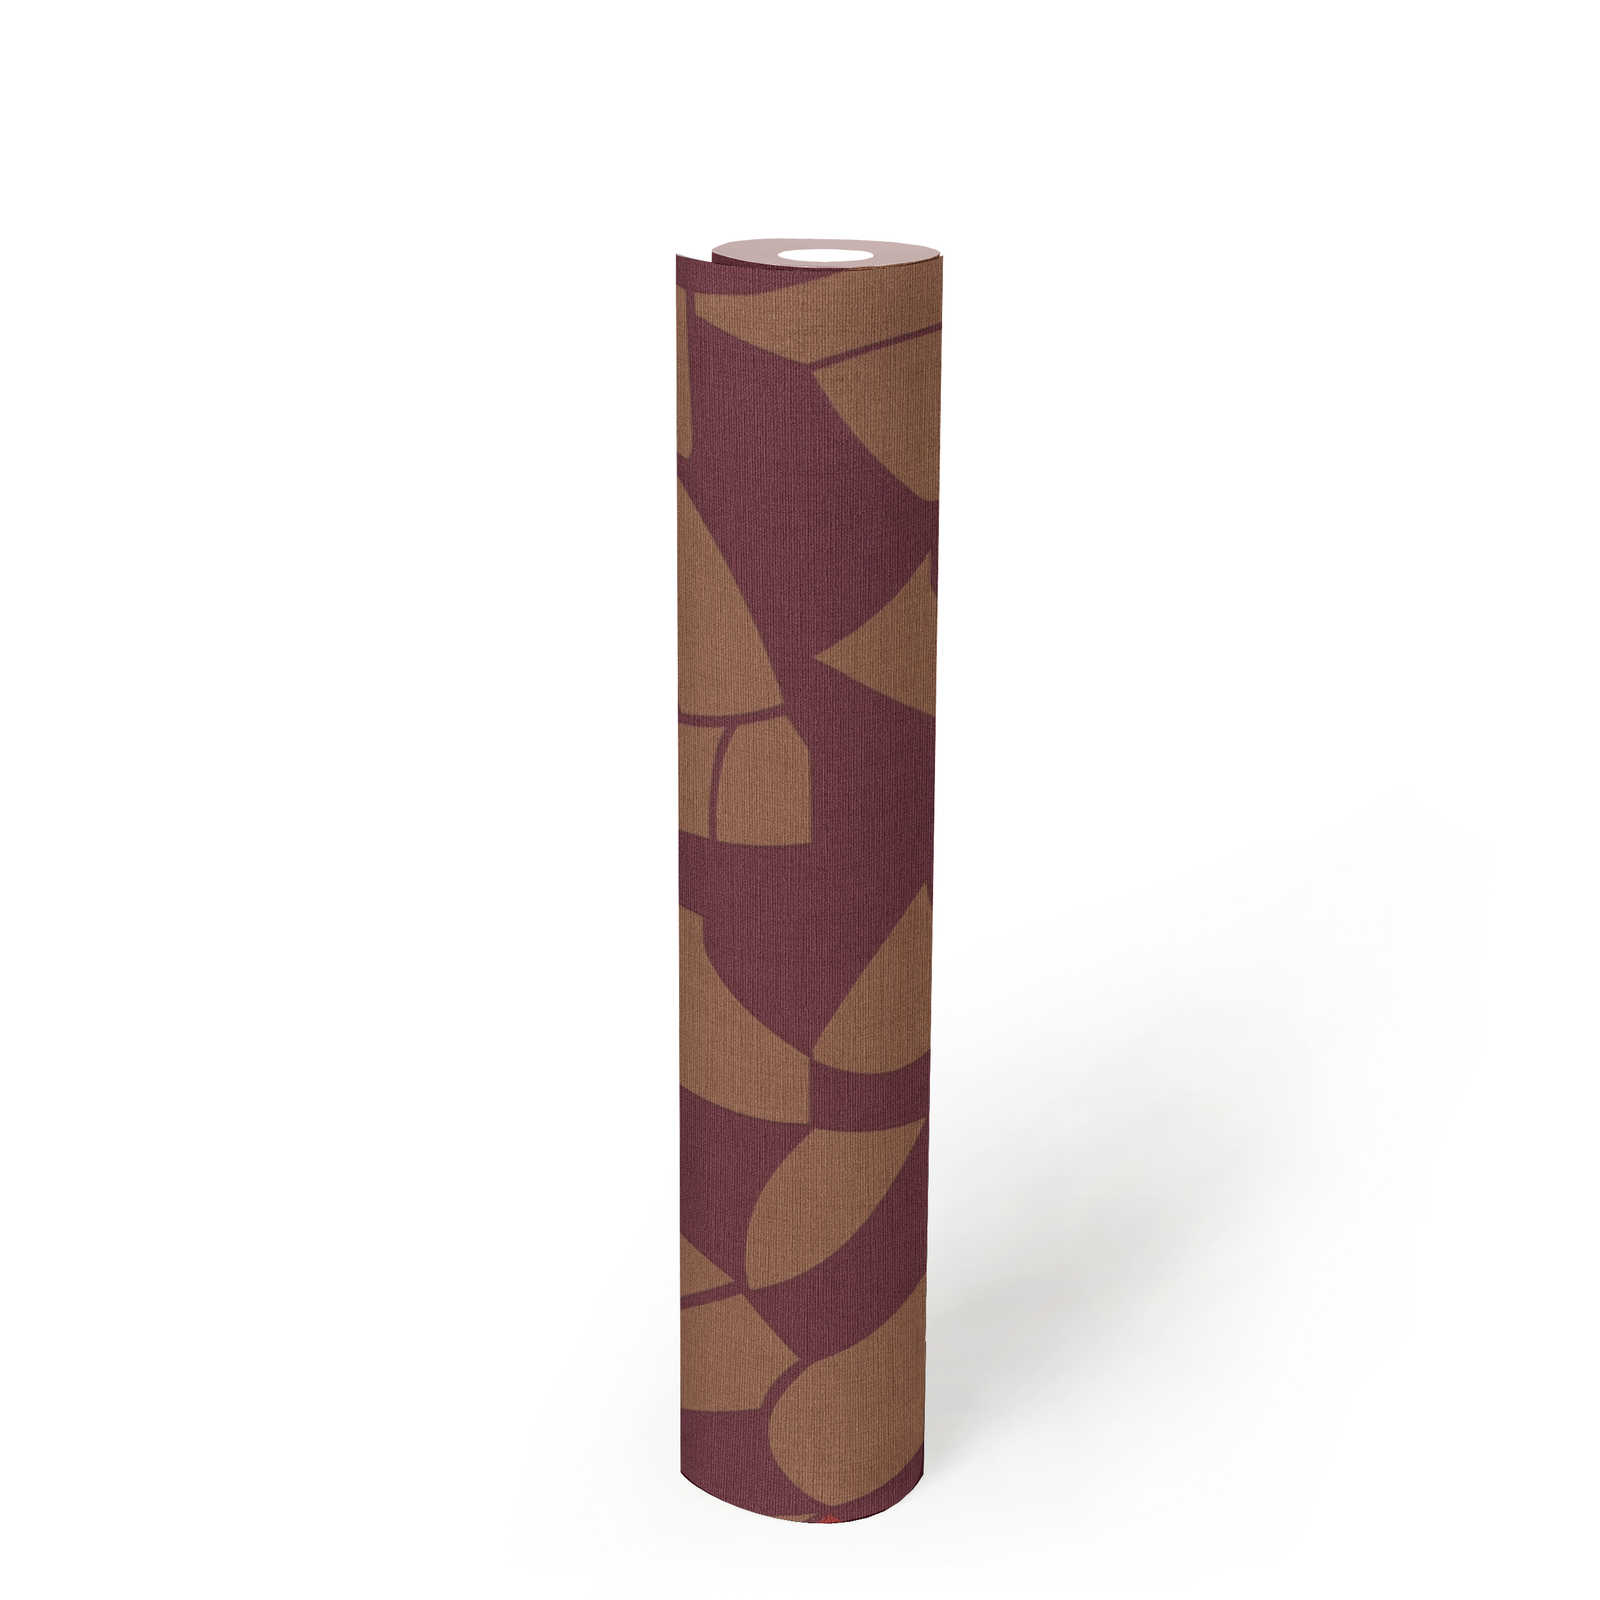             Non-woven wallpaper in dark colours in an abstract pattern - purple, brown, red
        